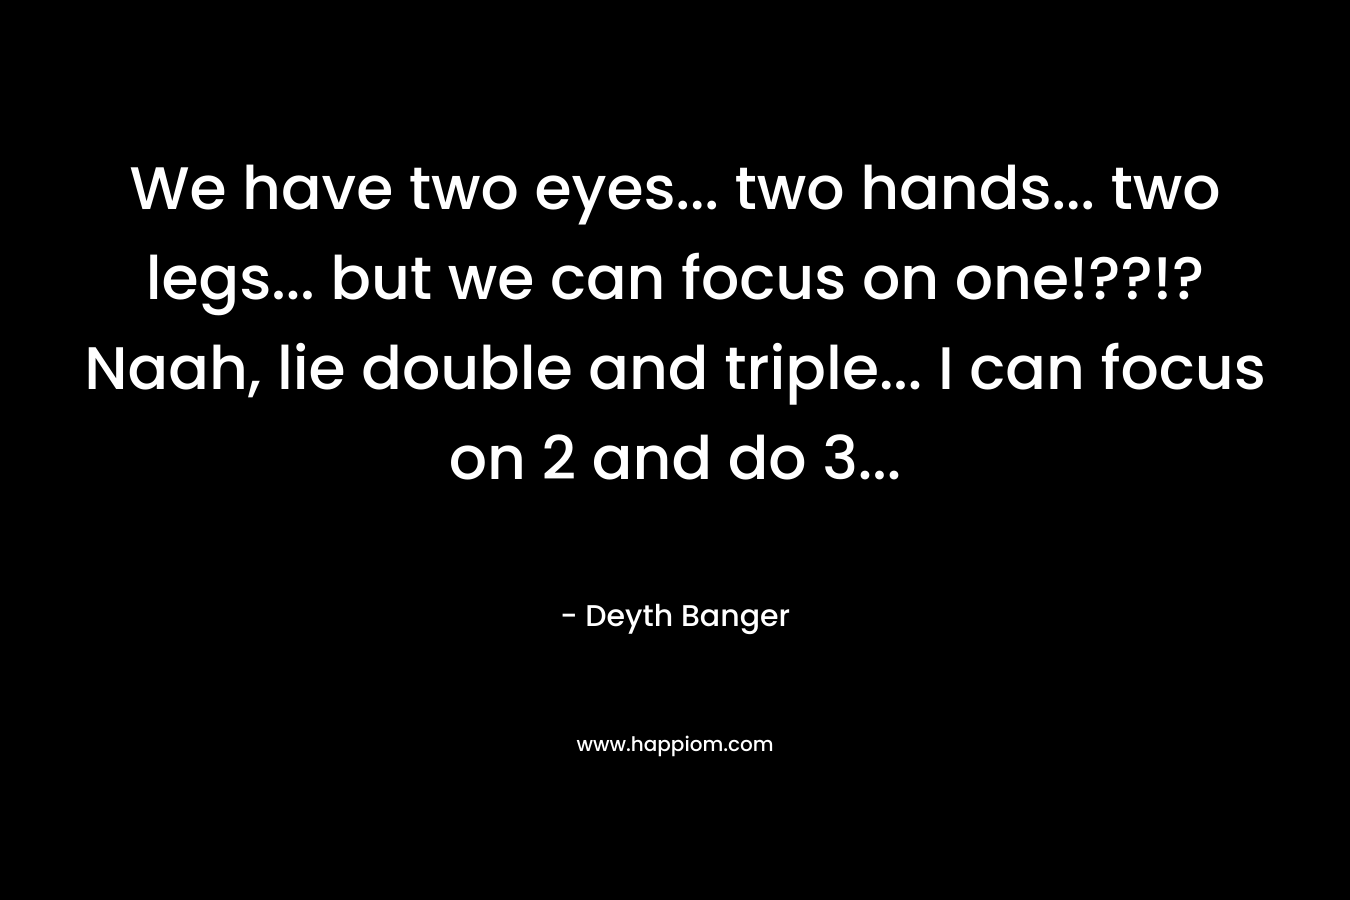 We have two eyes… two hands… two legs… but we can focus on one!??!?Naah, lie double and triple… I can focus on 2 and do 3… – Deyth Banger